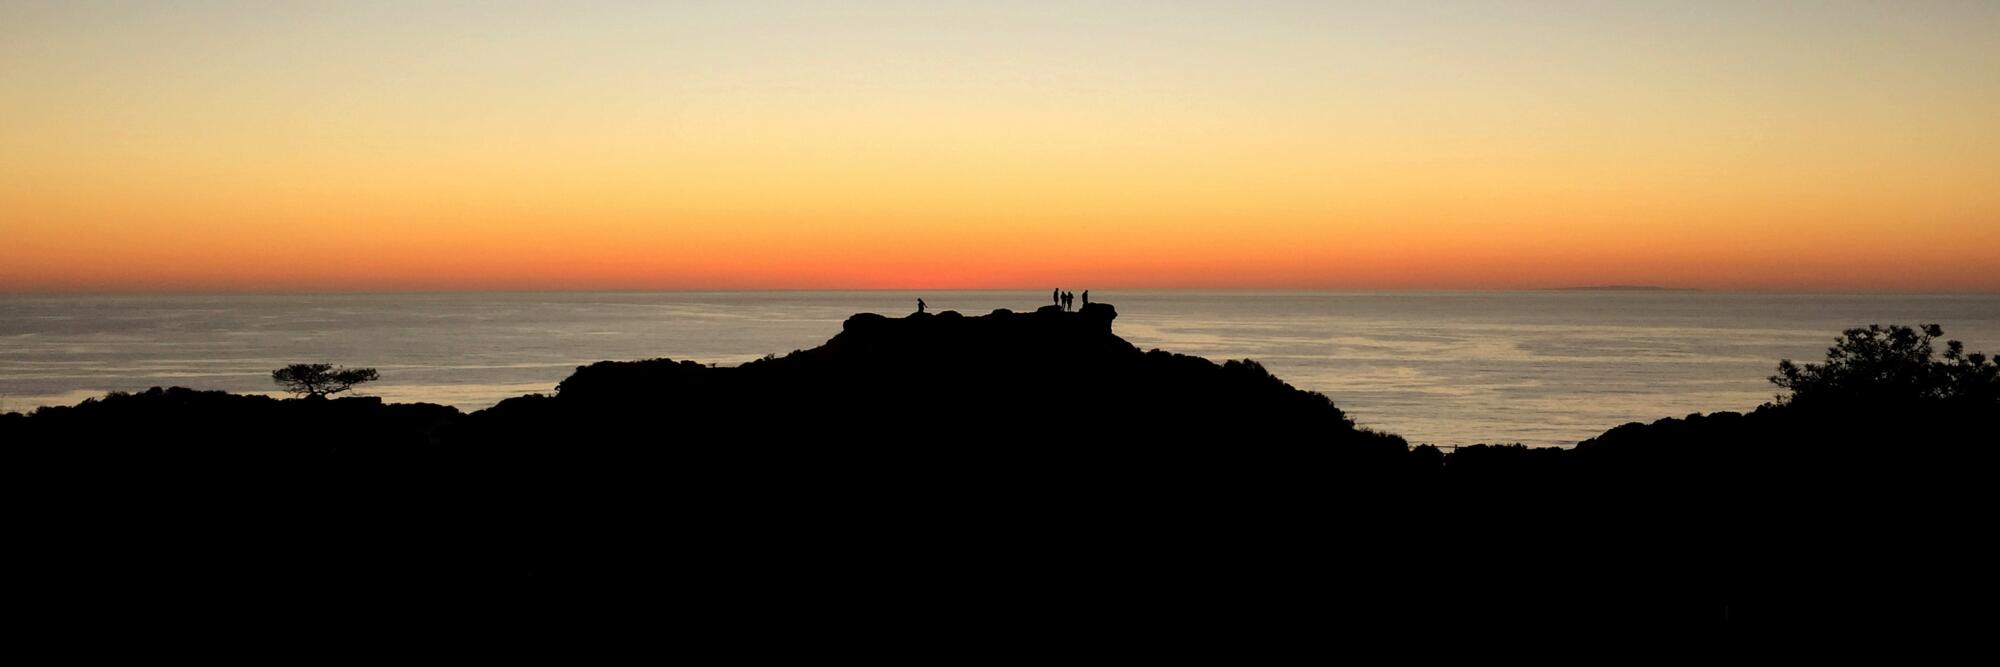 Torrey Pines State Natural Reserve with a silhouette of hills, and the ocean and orange sky behind them.